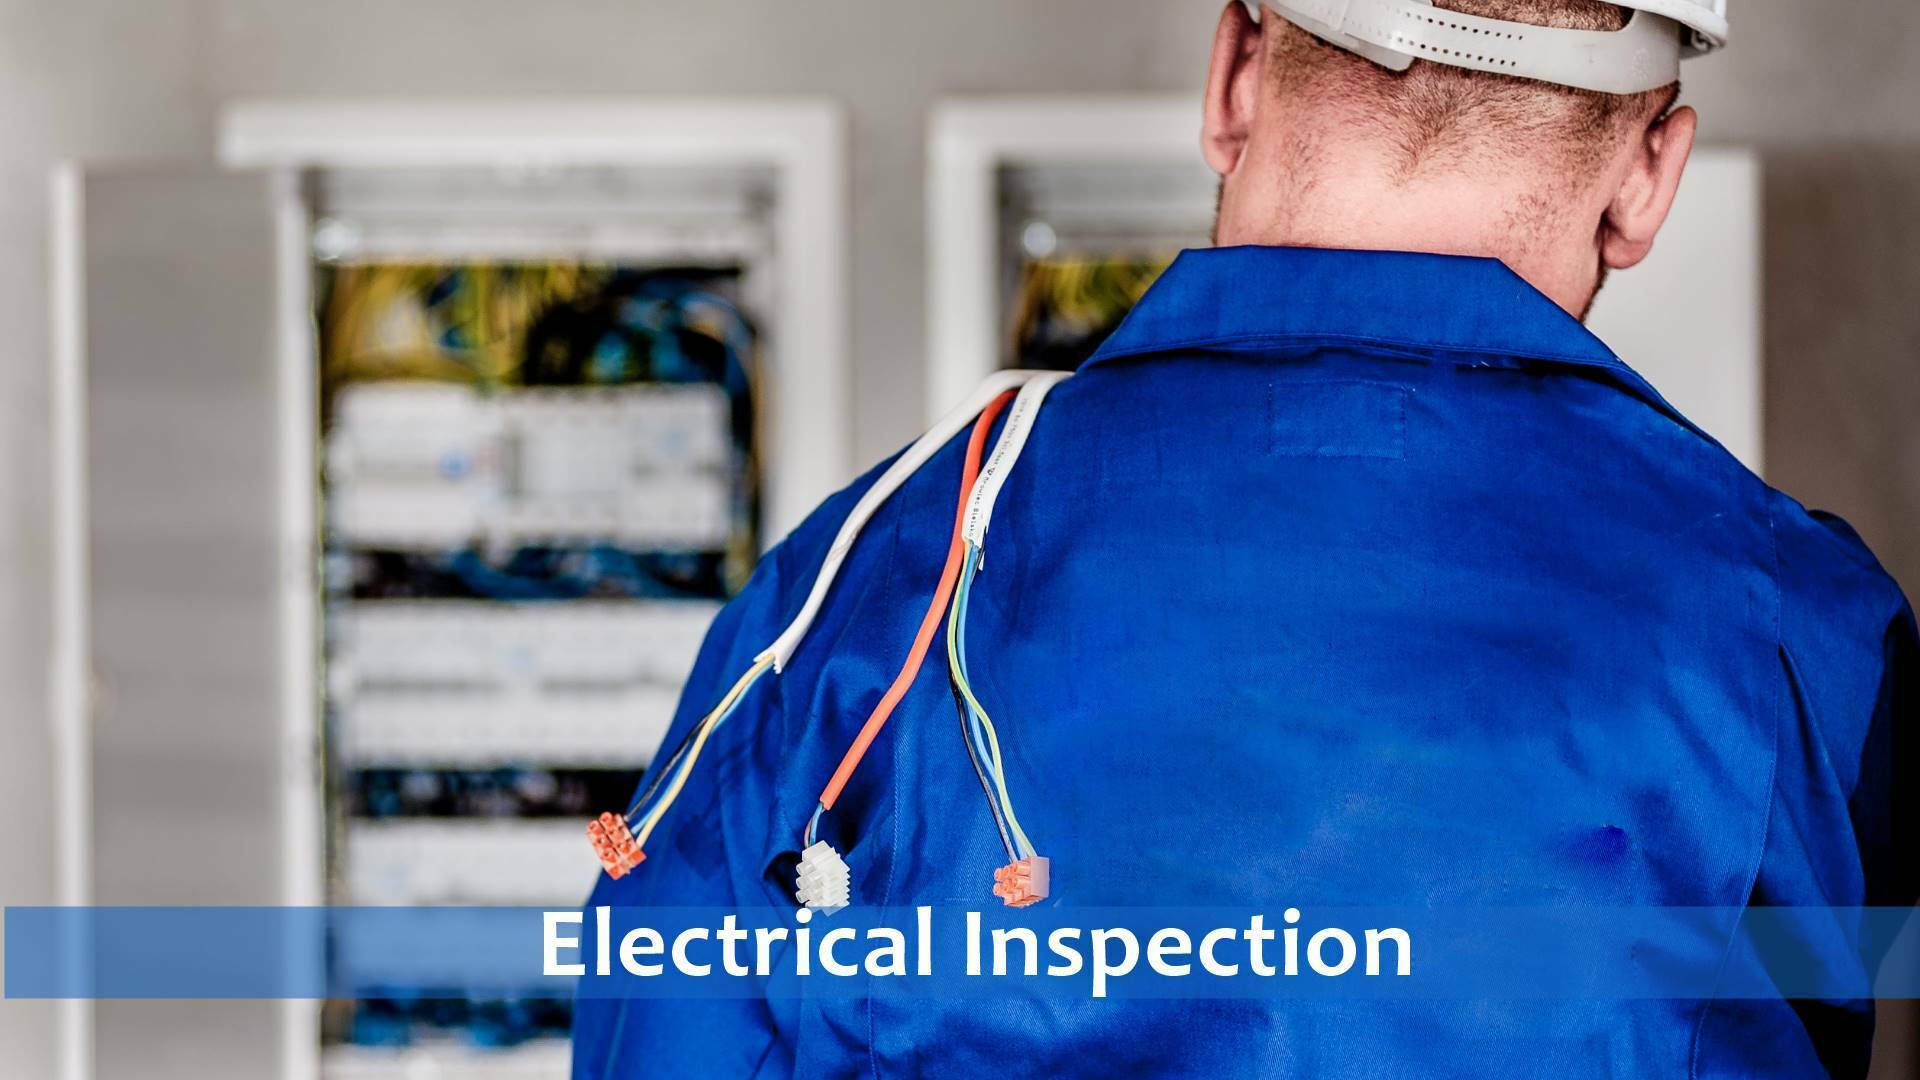 An Electrical Inspection